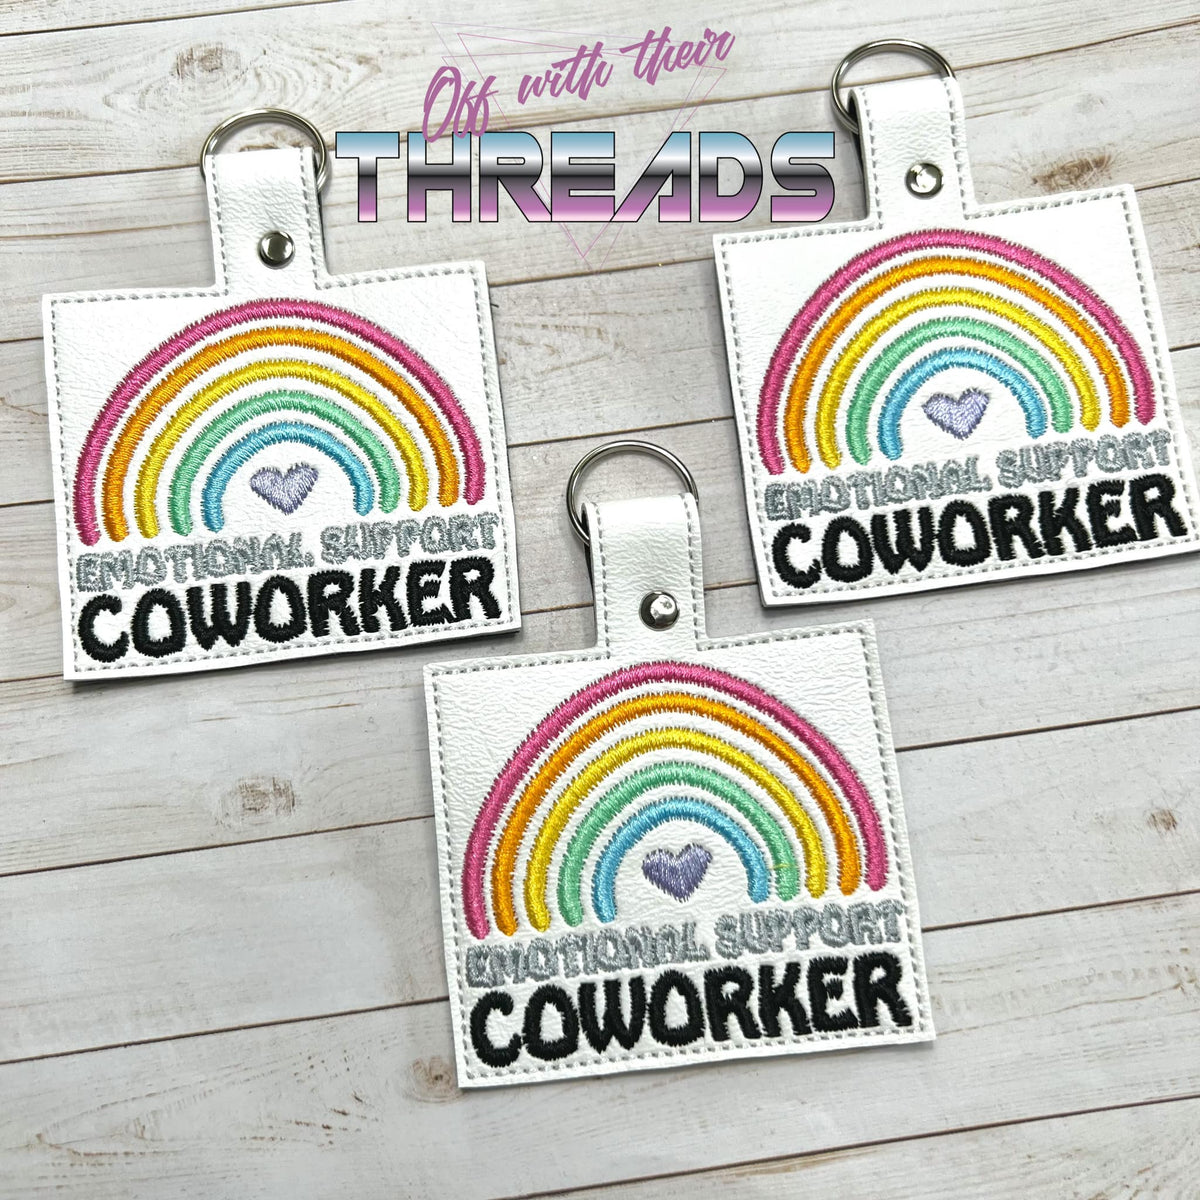 DIGITAL DOWNLOAD Emotional Support Coworker Snap Tab Key Chain – Off With  Their Threads